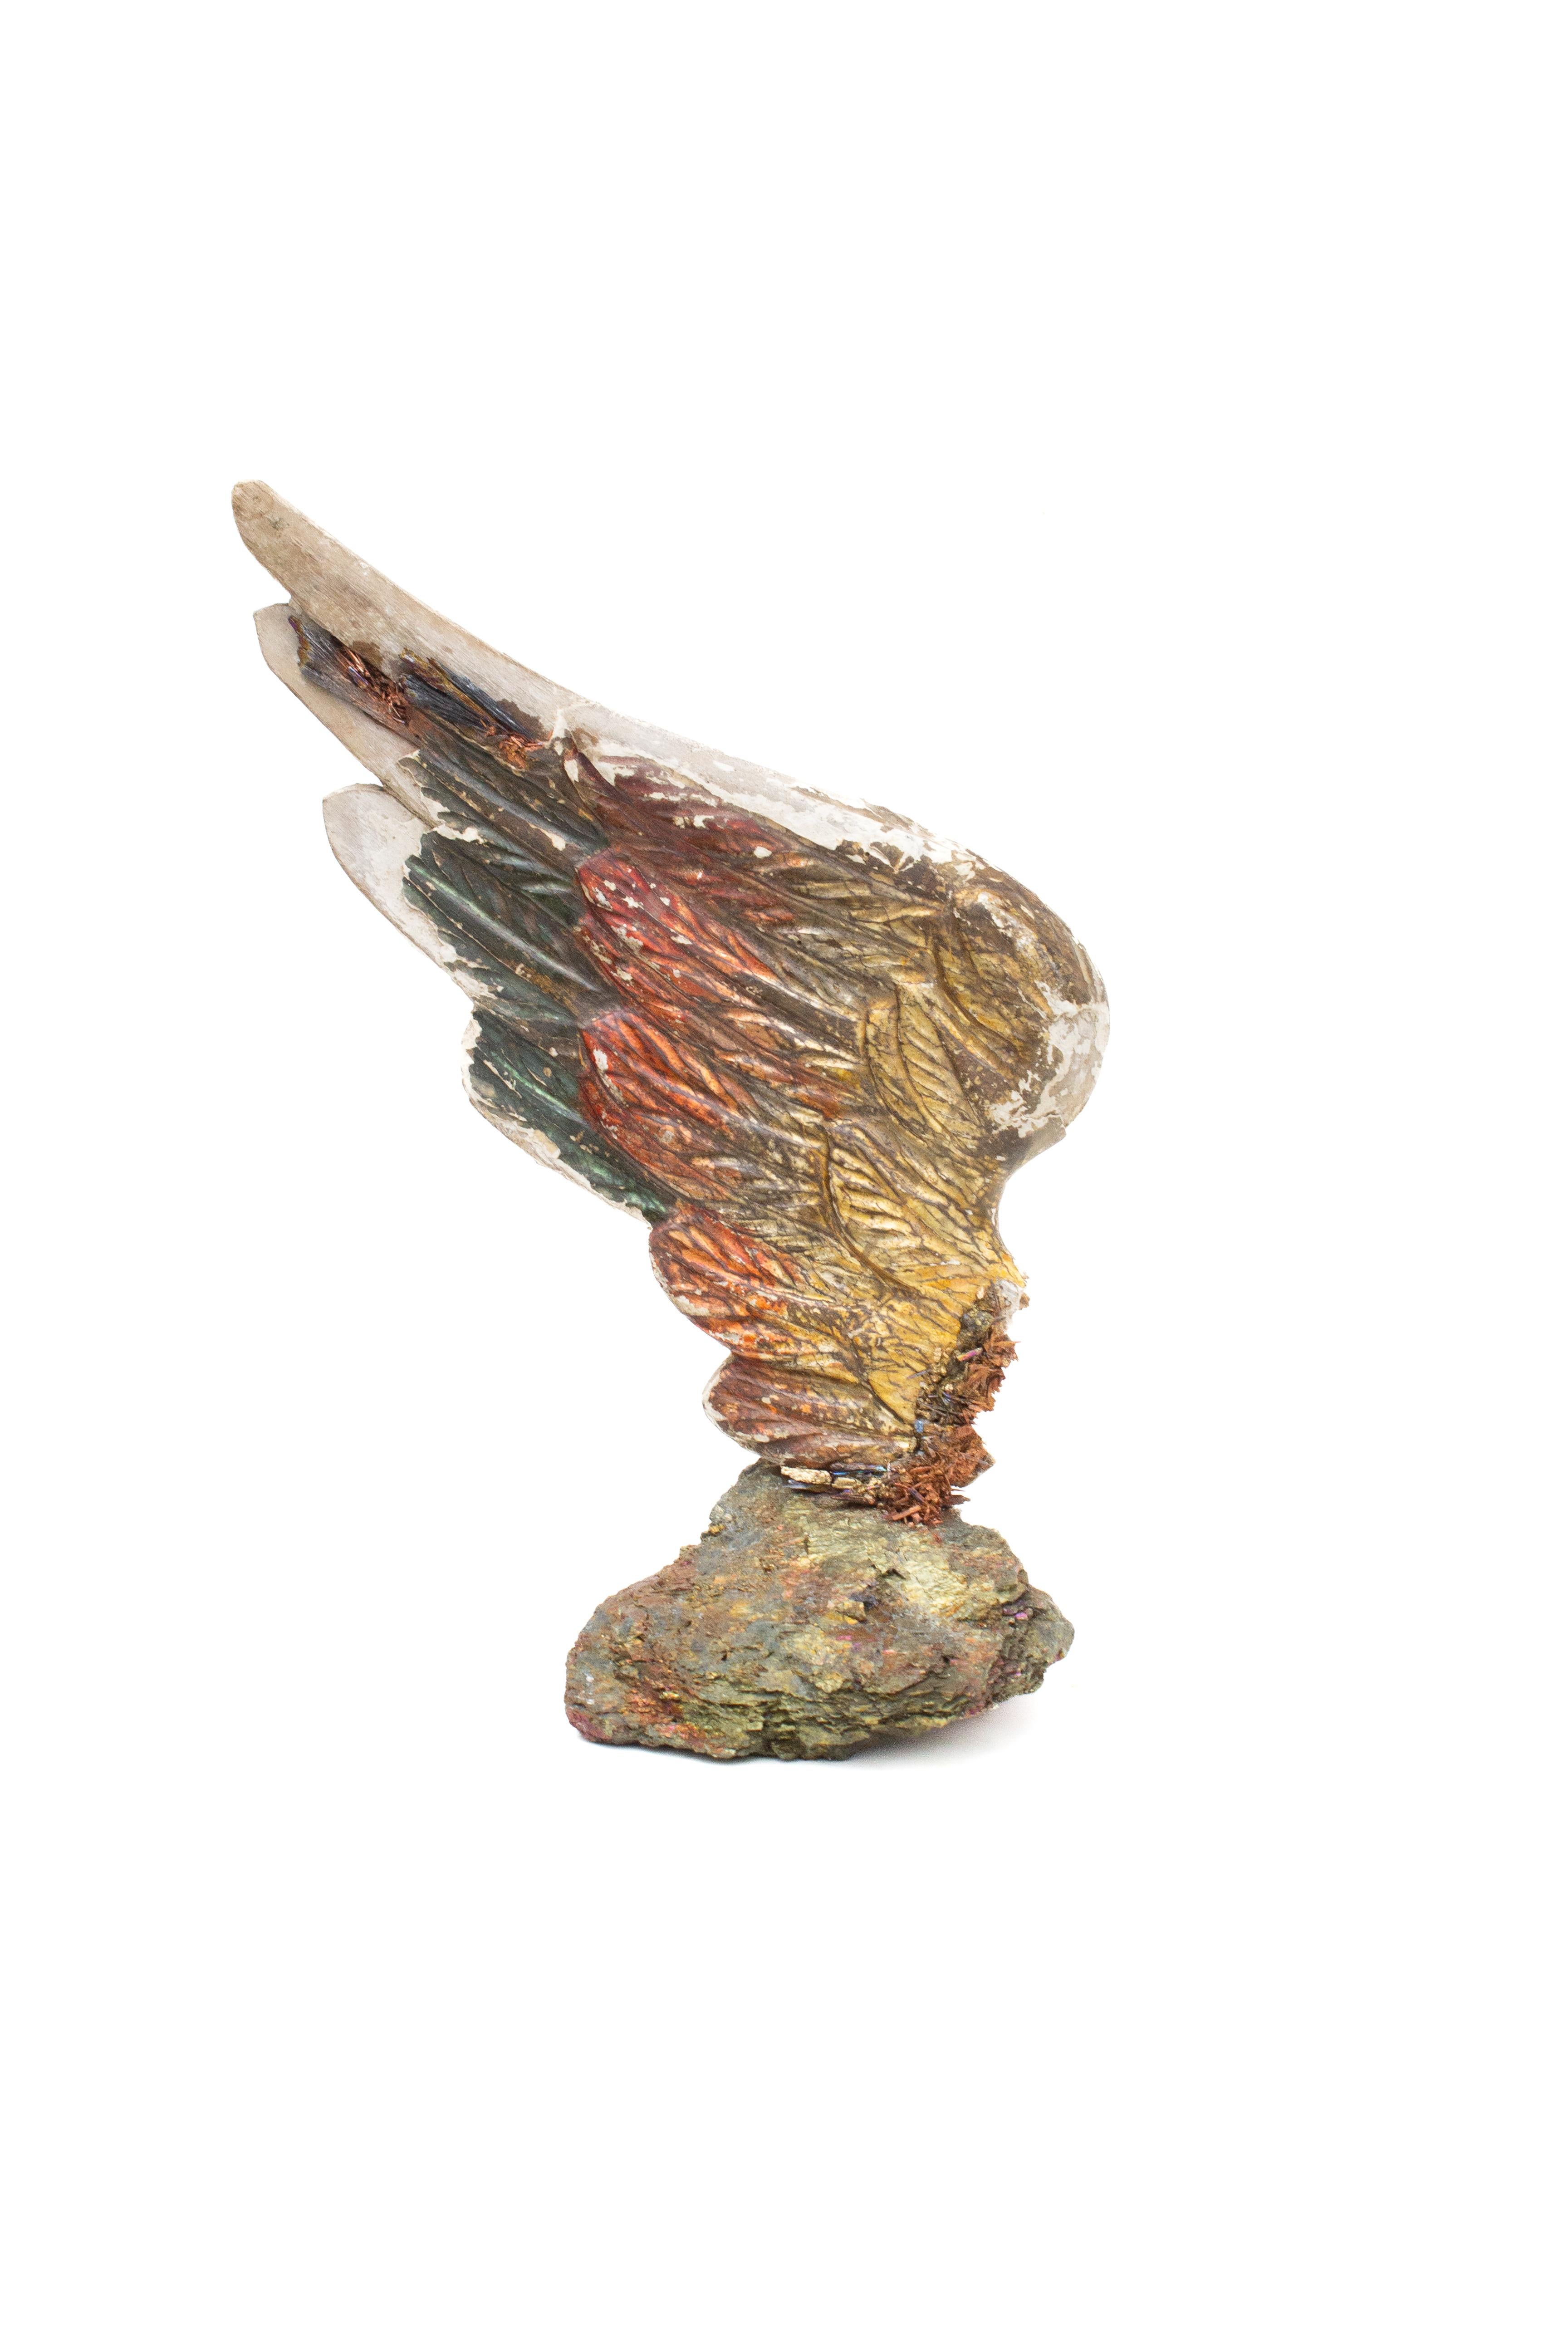 Sculptural 18th century Italian hand-carved angel wing mounted on a chalcopyrite and adorned with kyanite. The hand-carved angel wing was once part of a heavenly, angelic depiction in a historic church in Tuscany. The paint and gilding is original